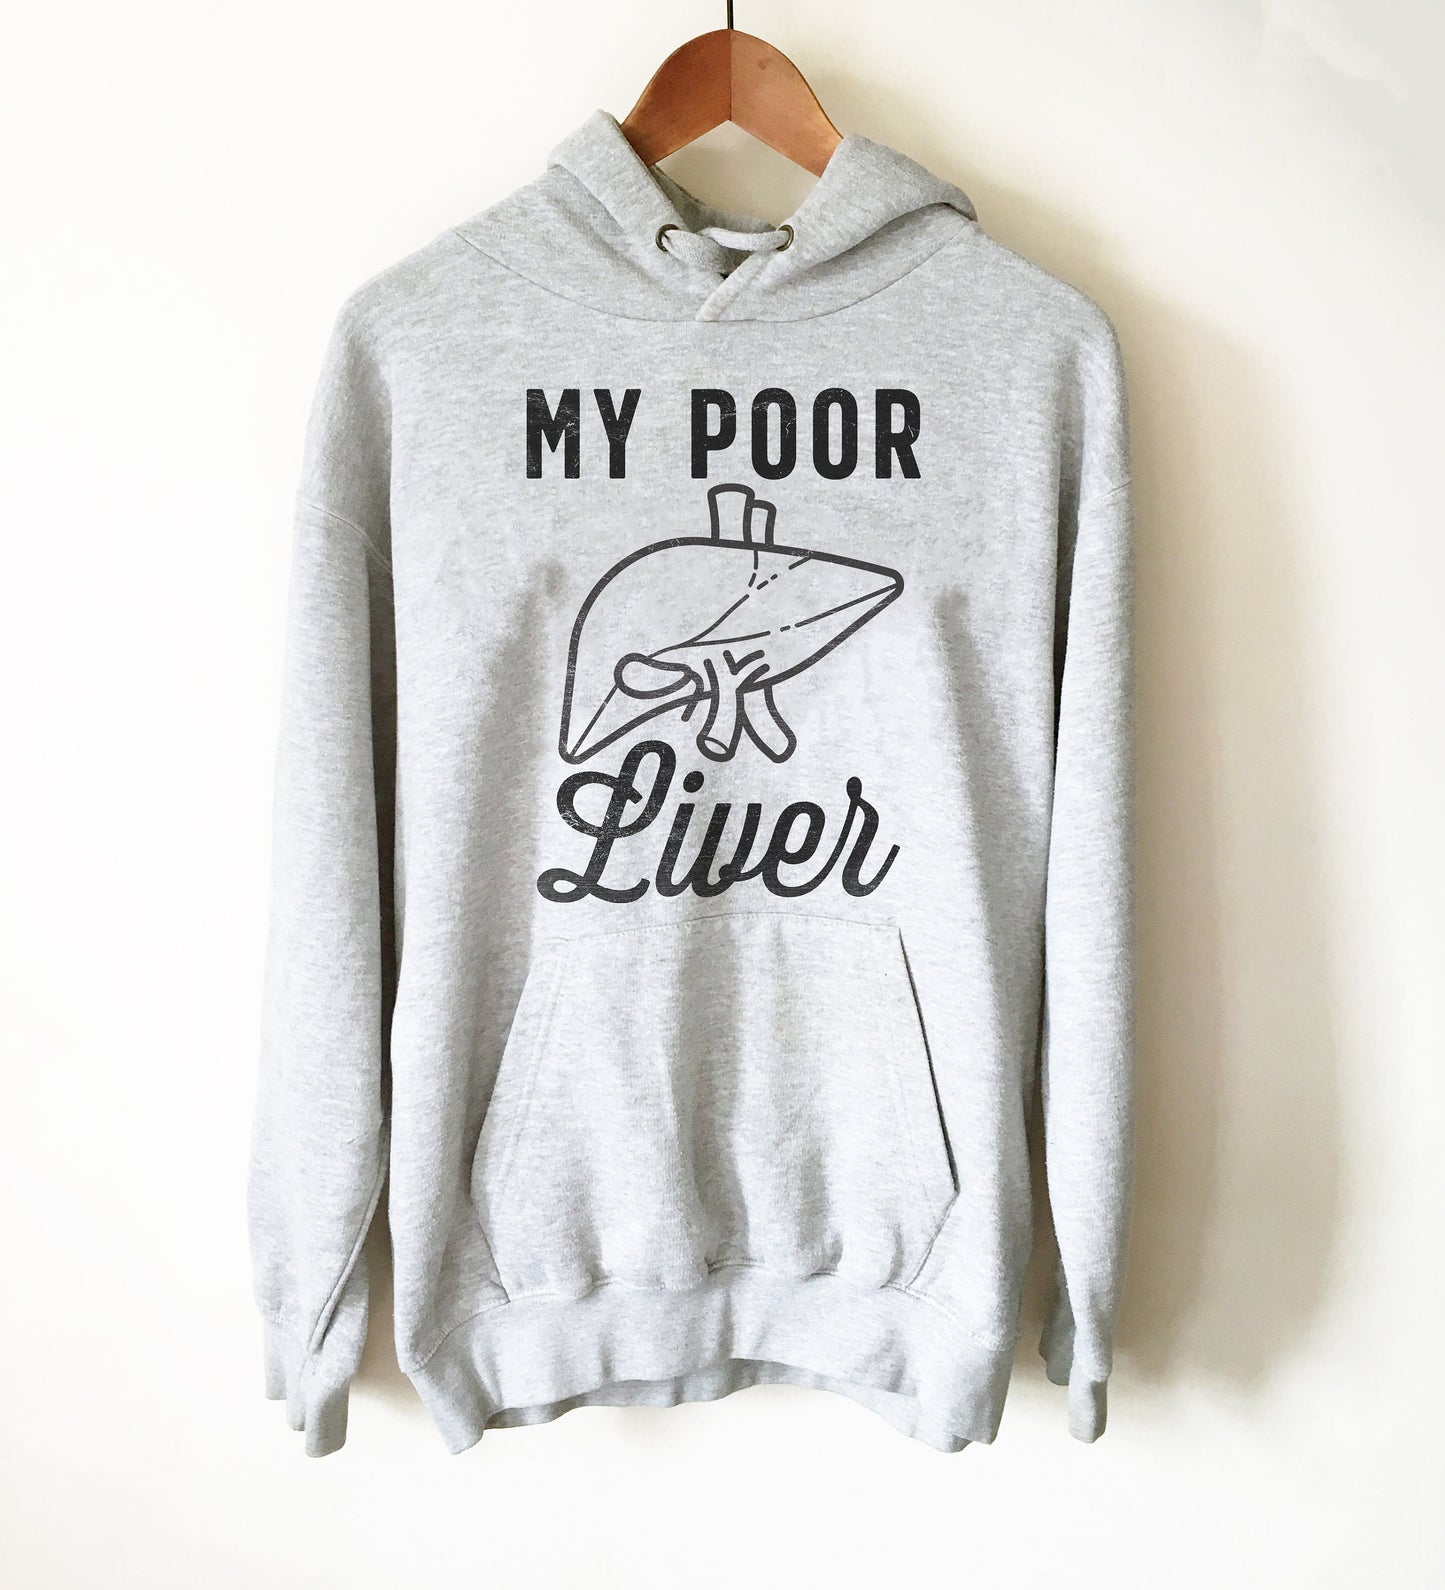 My Poor Liver Hoodie - Drinking Shirts, Drunk Shirt, Funny Drinking Shirt, Drinking Team Shirts, Wine Lover Gift